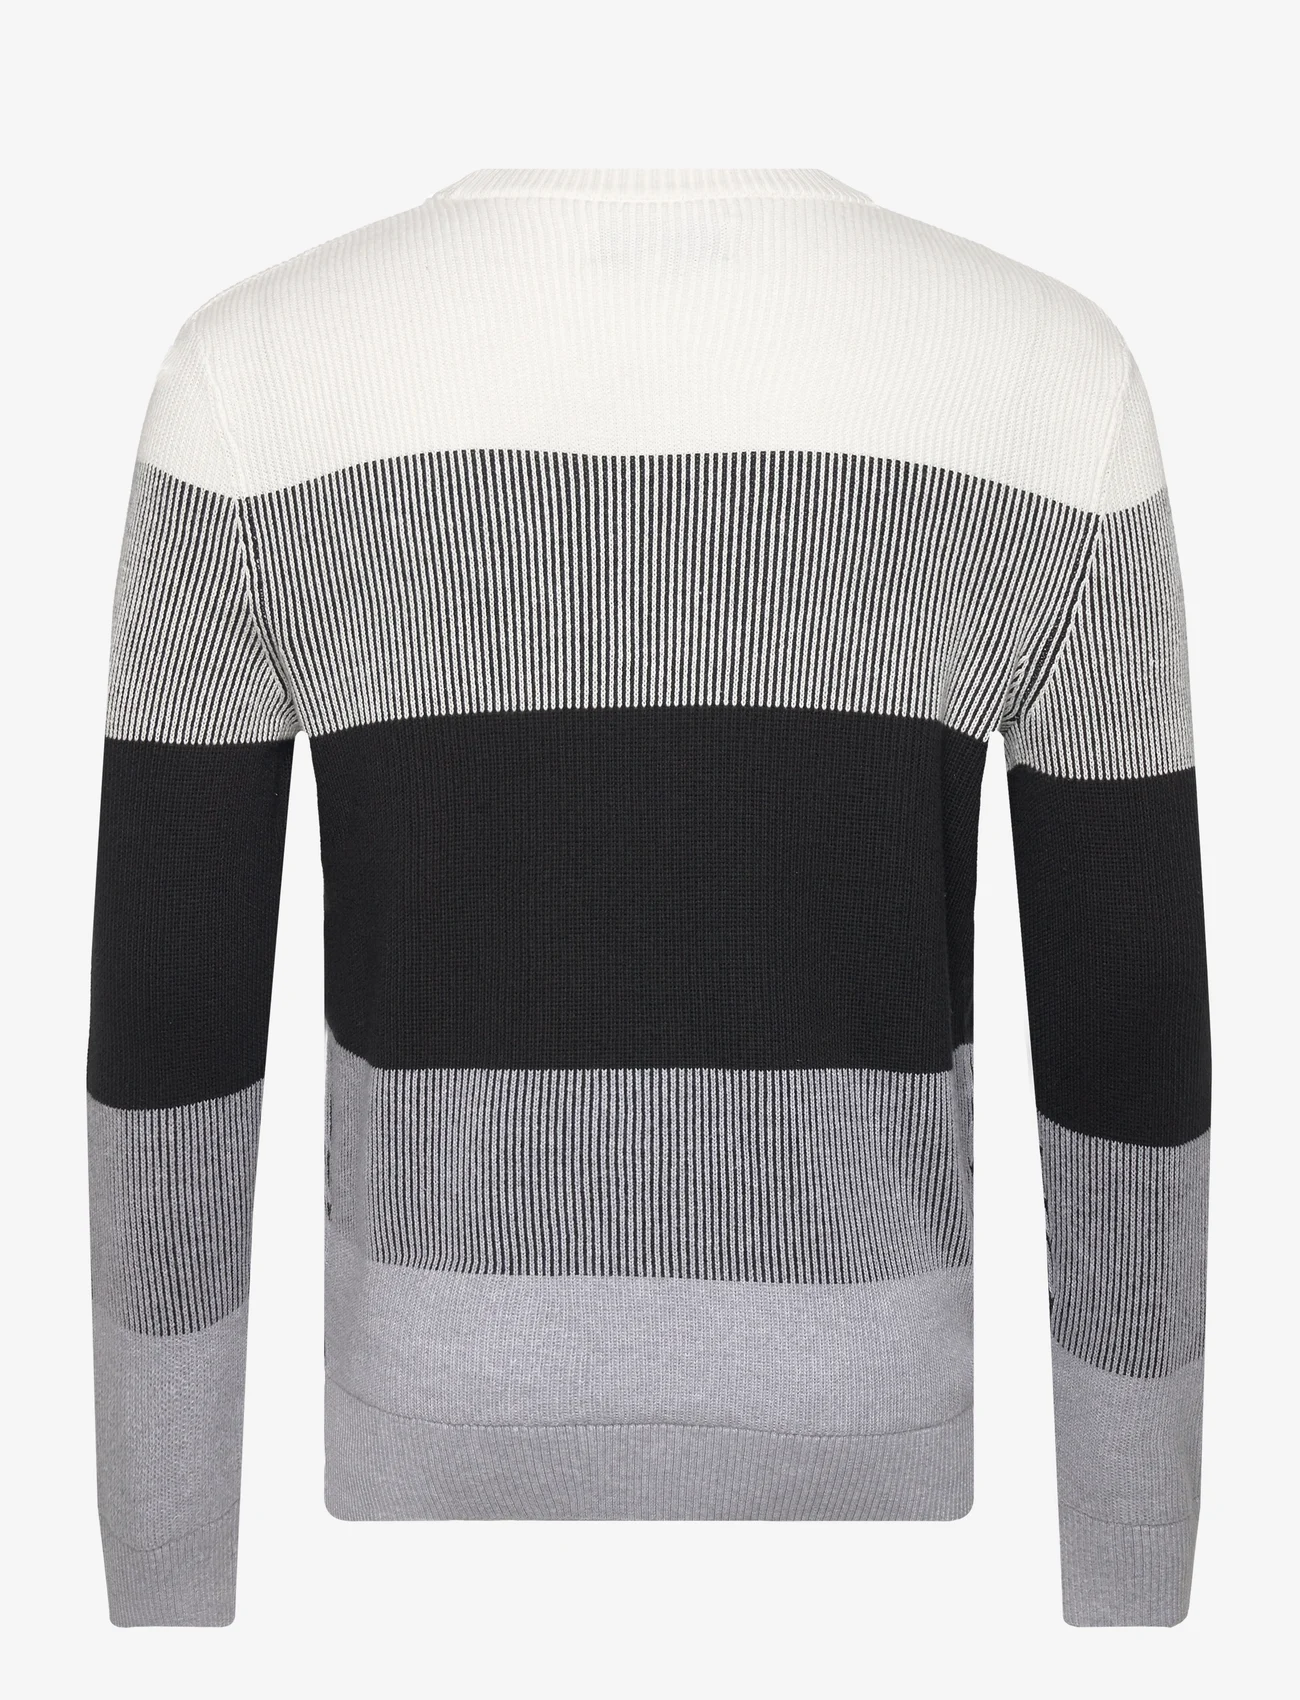 Tom Tailor - structured colorblock  knit - rundhals - white black grey colorblock - 1